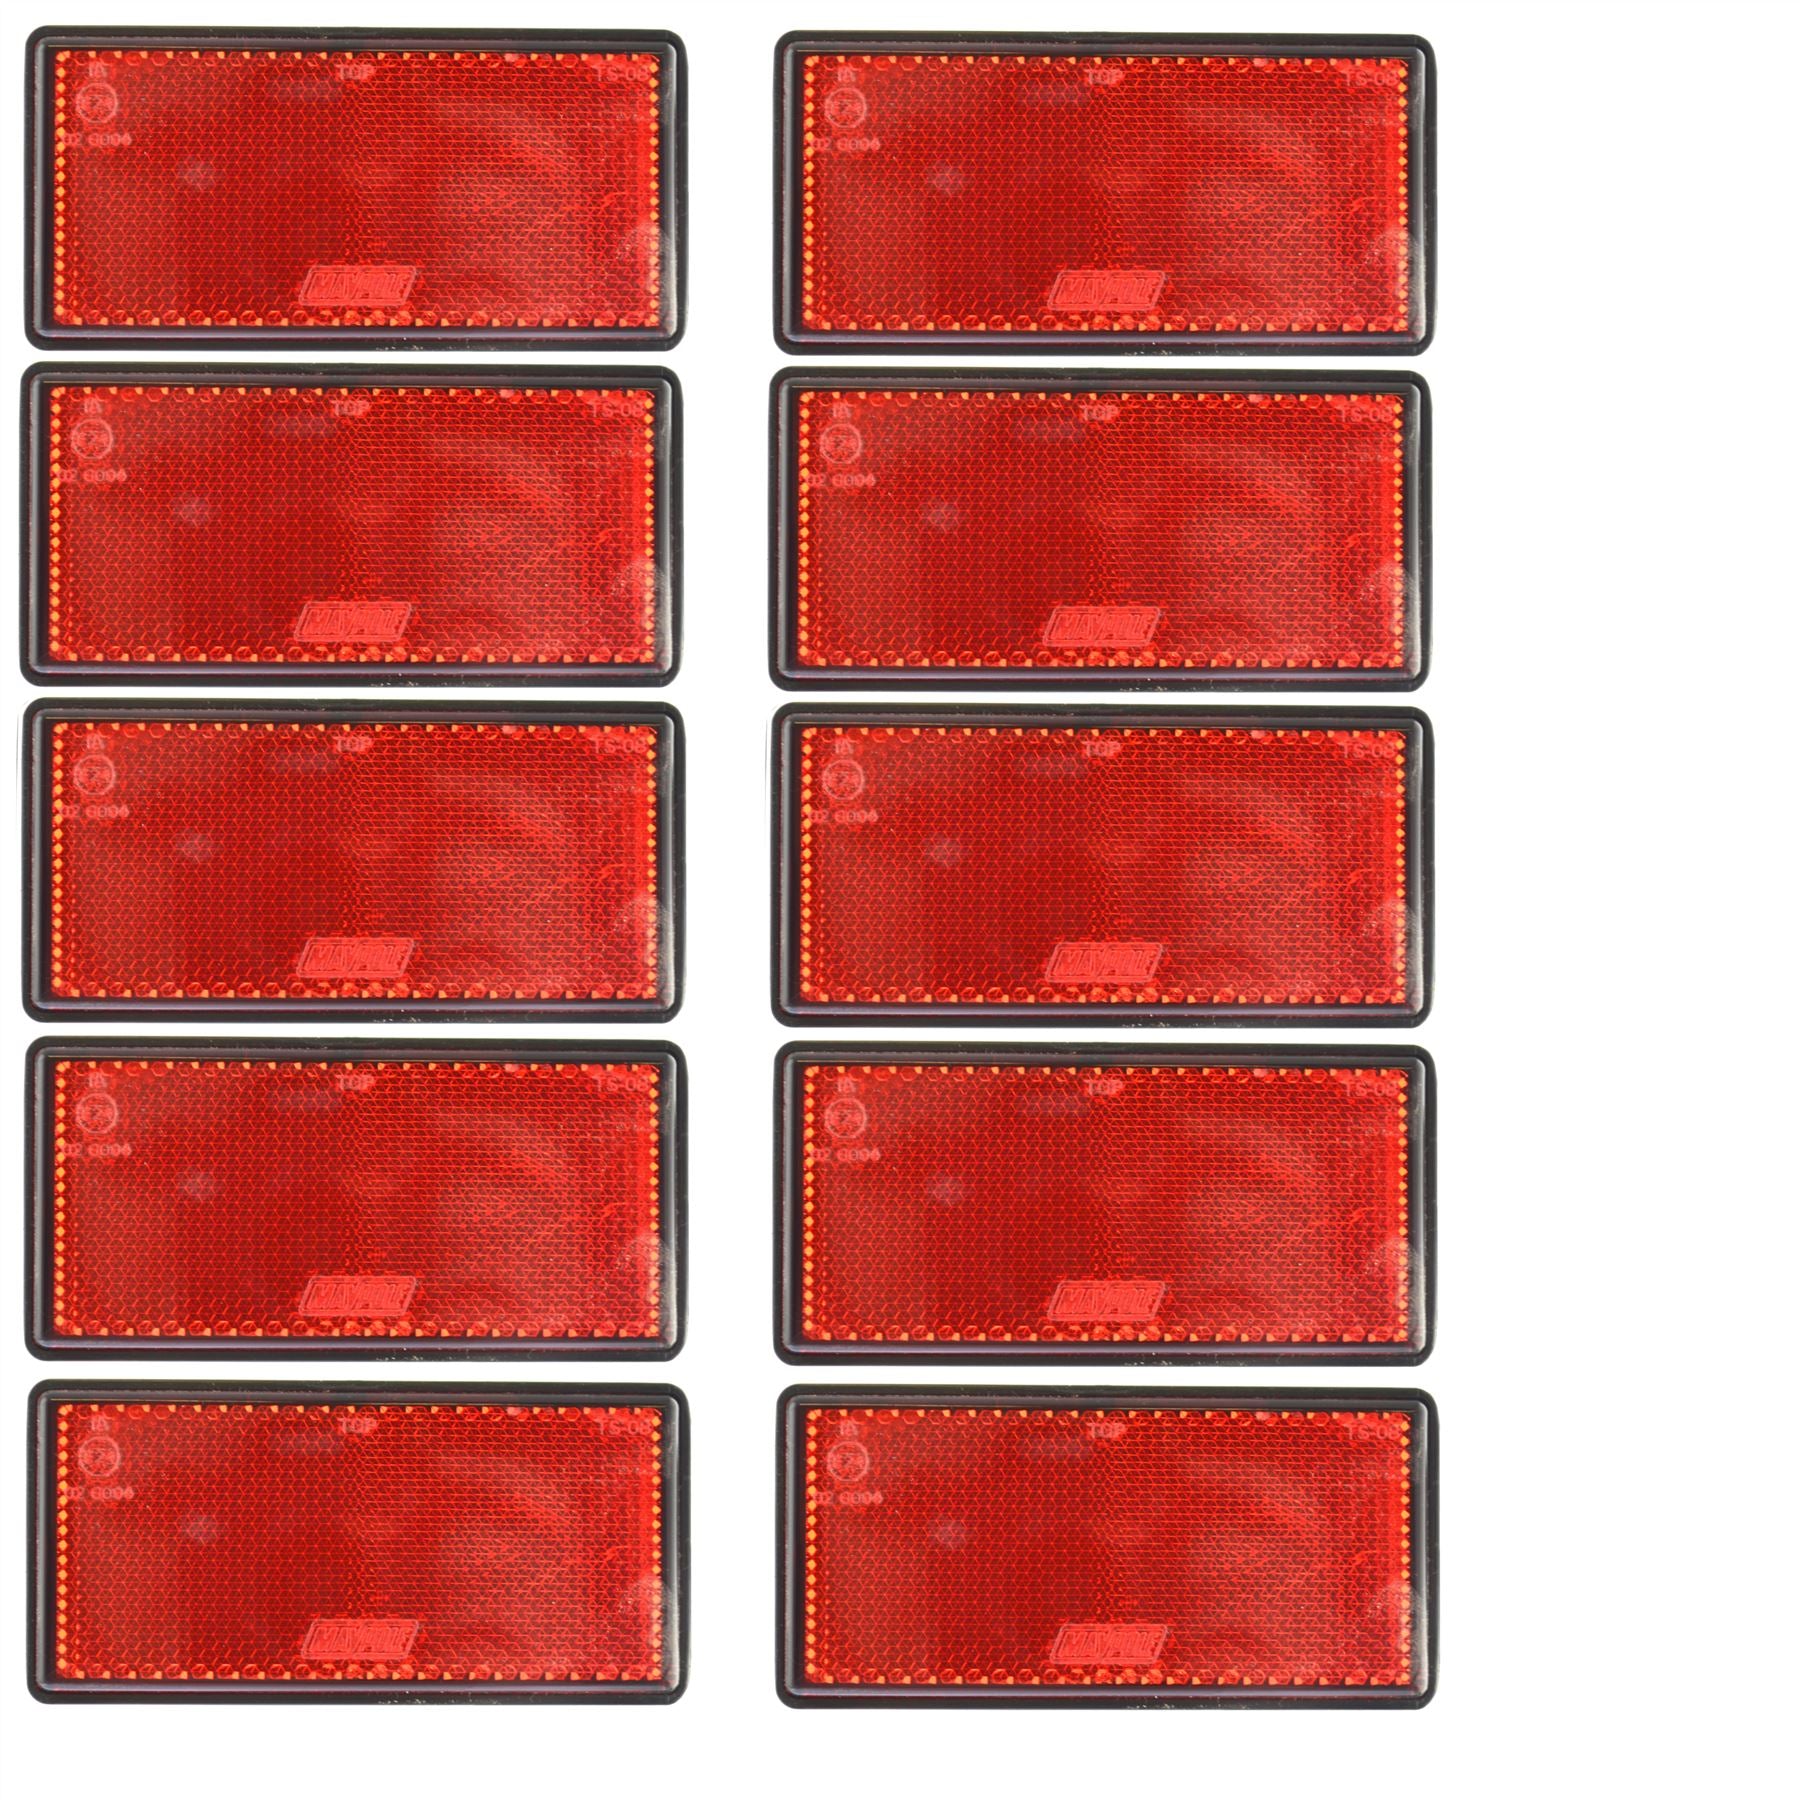 Red Large Rear Reflector 10 Pack Trailer Fence Gate Post Self-Adhesive TR212